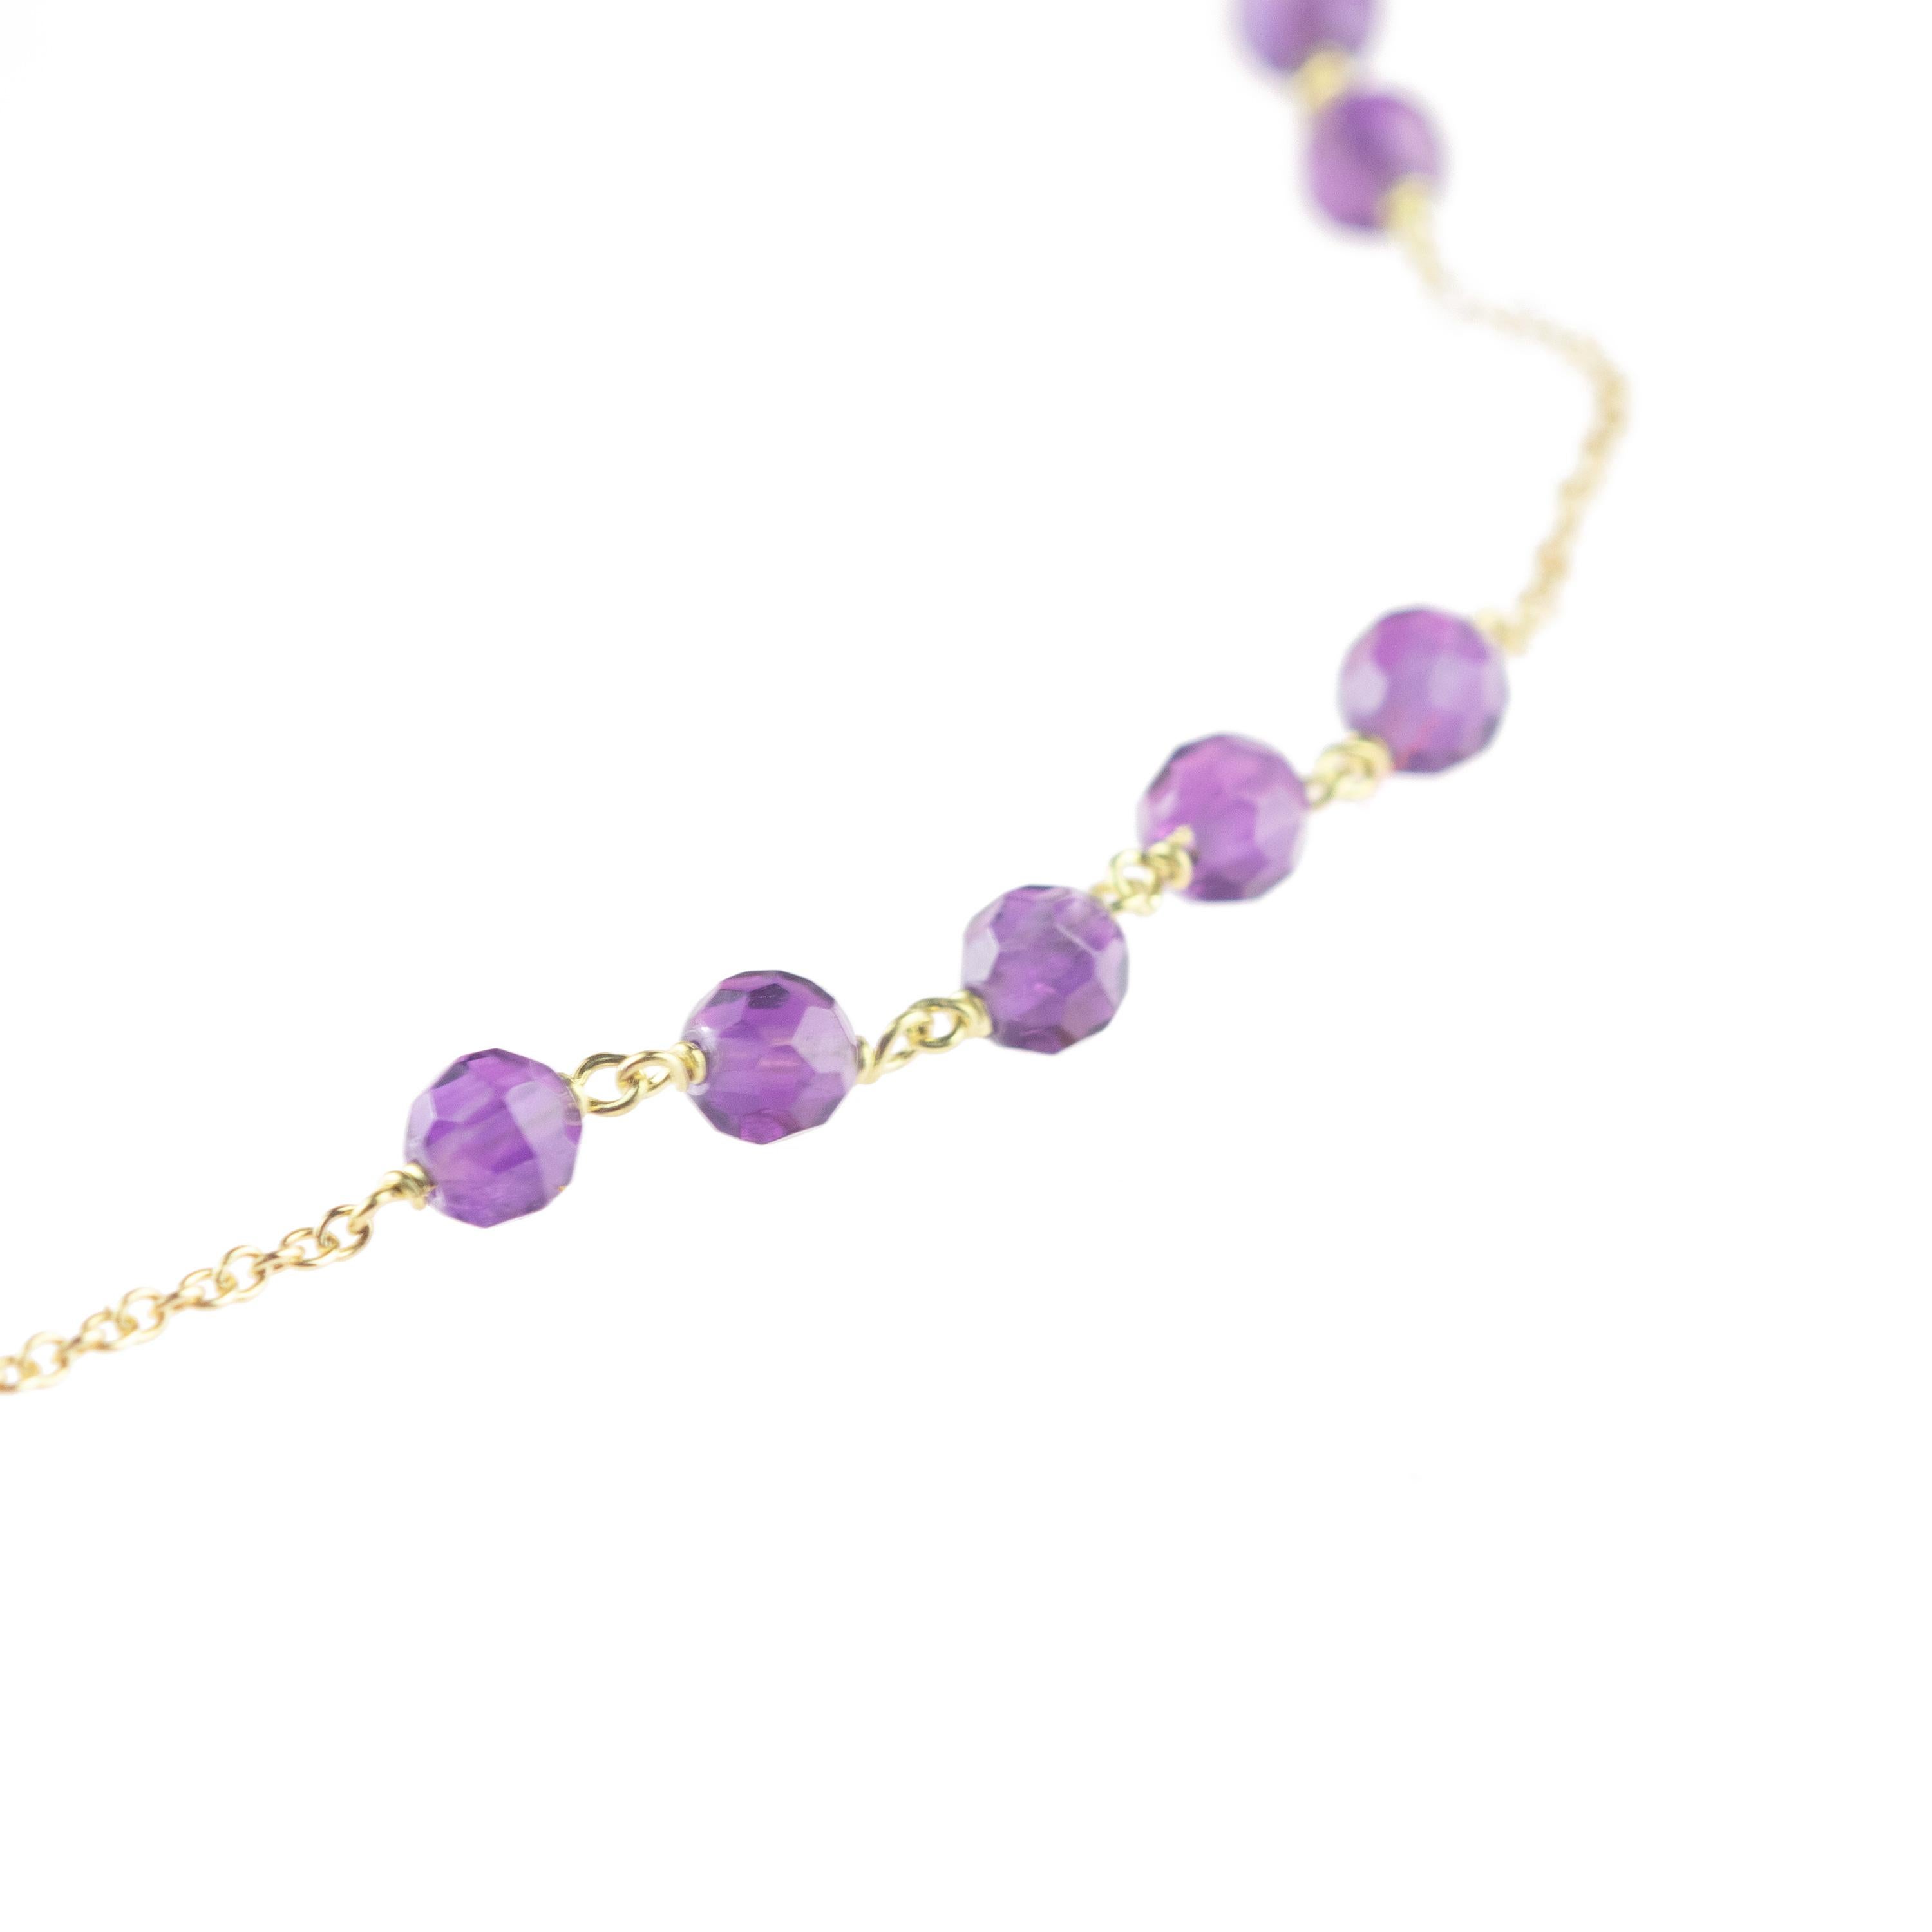 Amethyst Rondelles Gold Plate Chain Handmade Cocktail Chic Modern Necklace For Sale 4